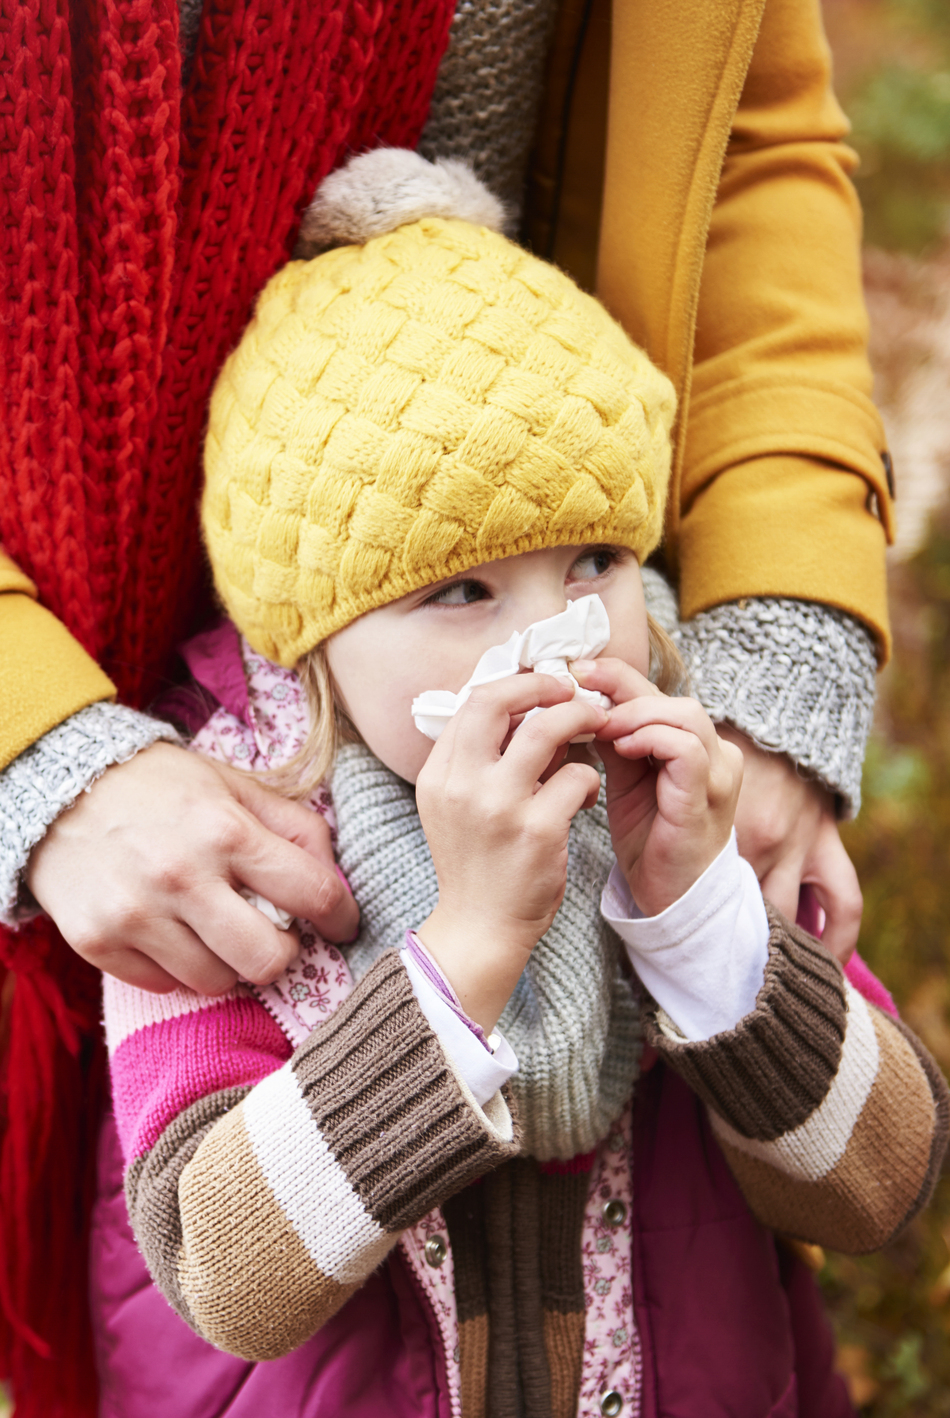 Debunking Old Wives' Tales: Preventing Your Child’s Seasonal Allergies